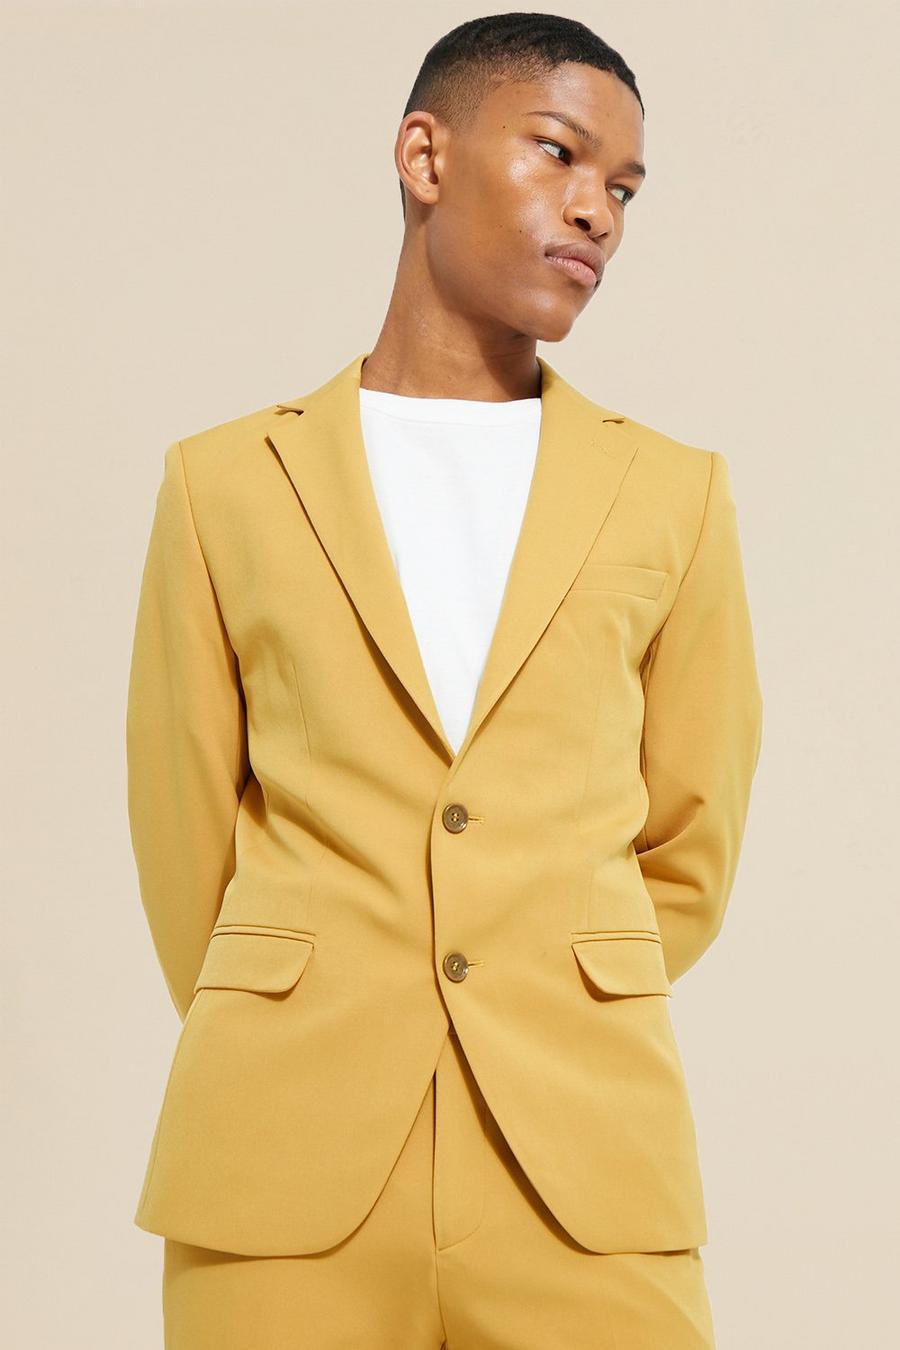 Mustard yellow Skinny Single Breasted Suit Jacket